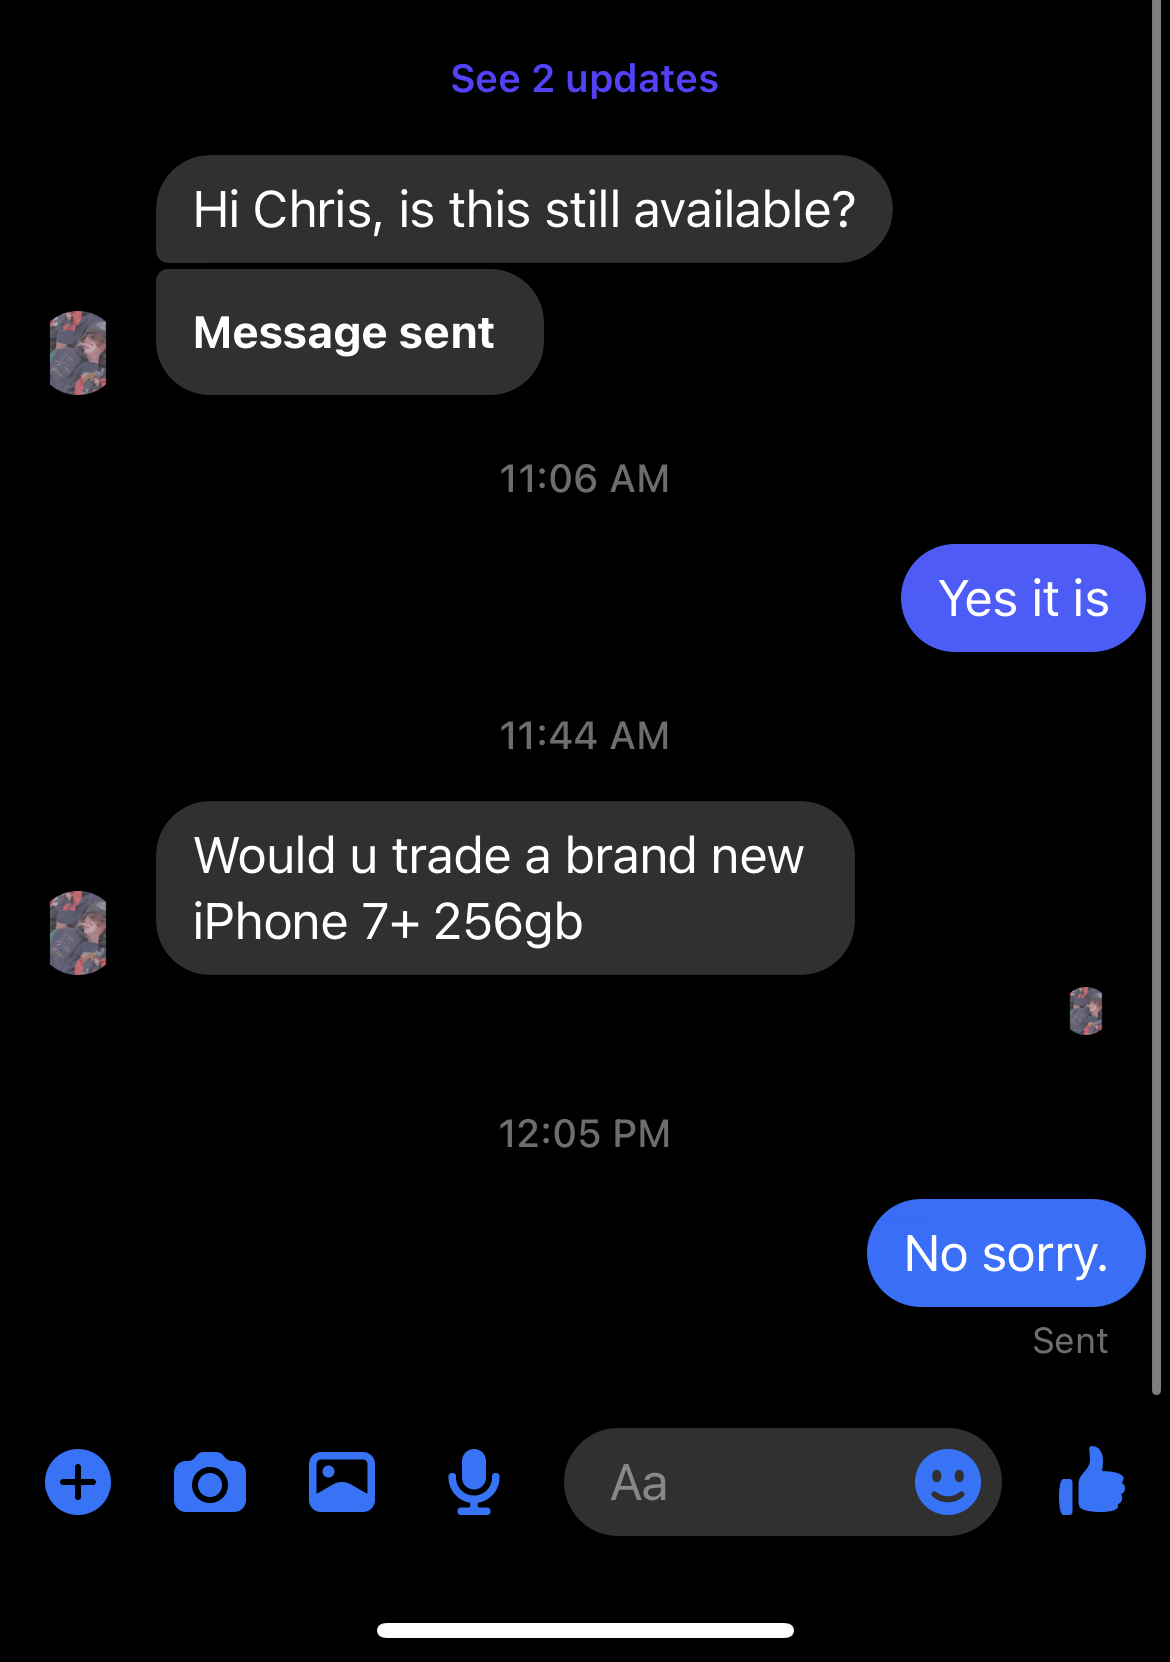 Marketplace convo asking “would you trade it for a new iPhone 7 256GB?”